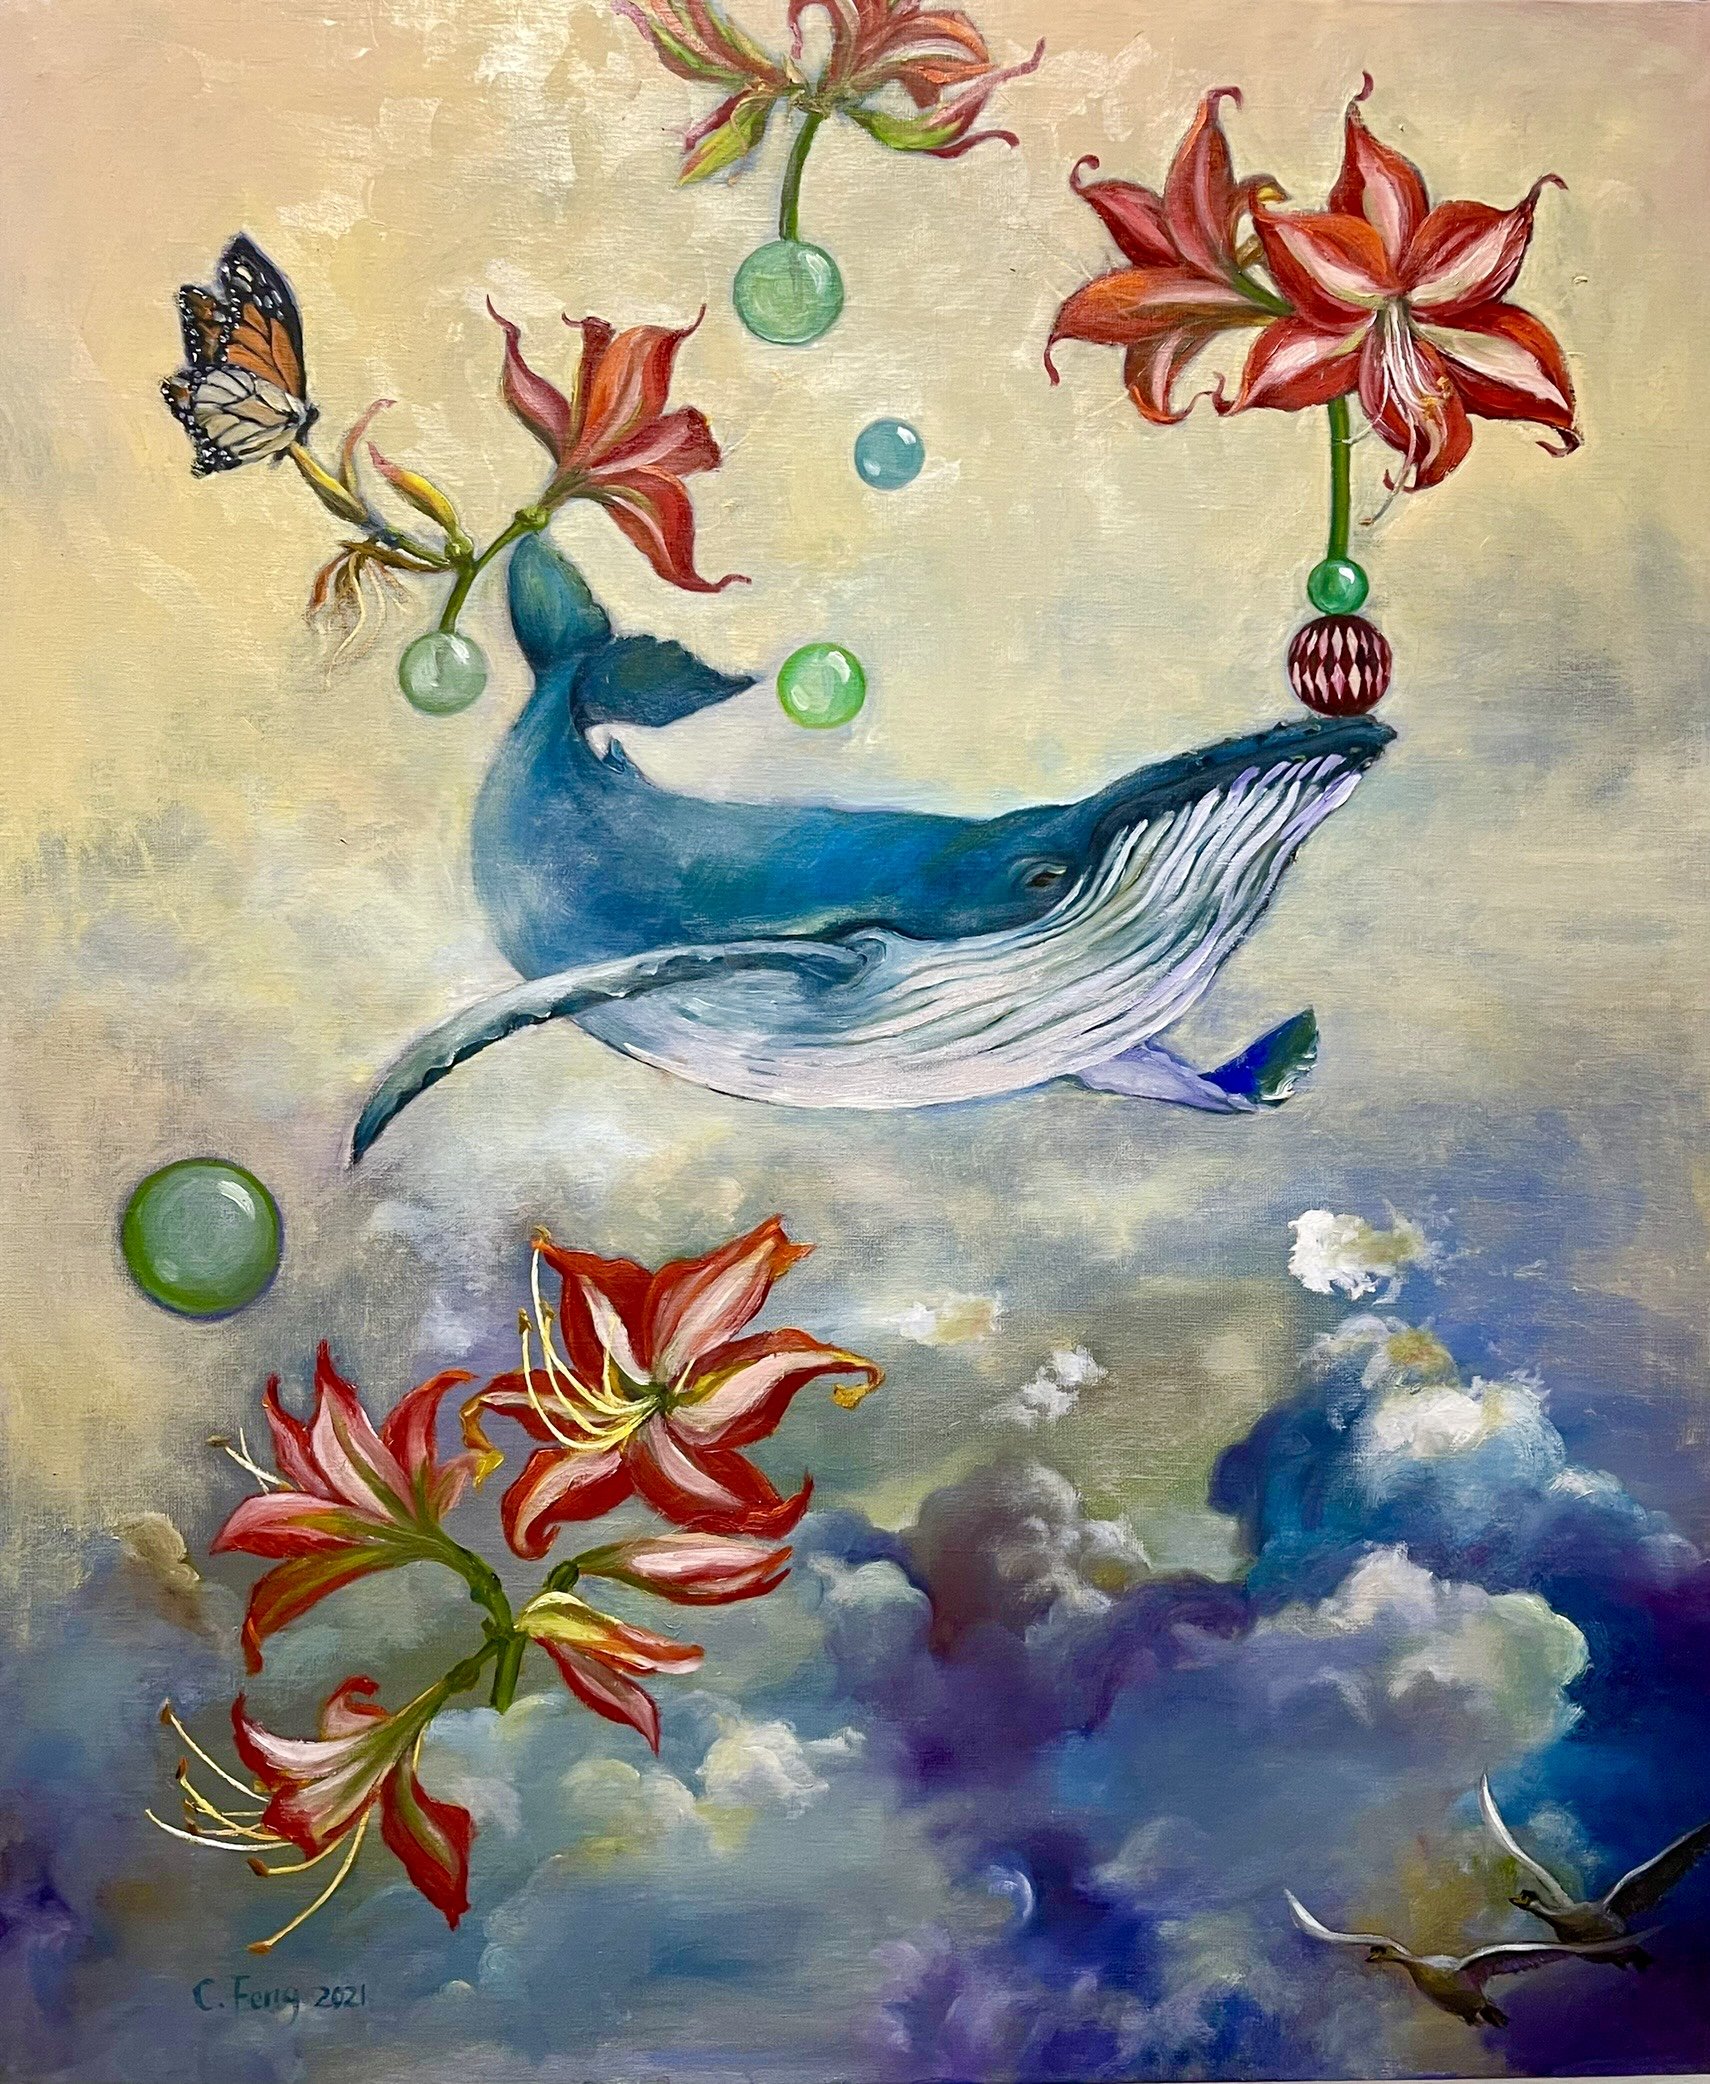 Frolicking/80x60cm/oil on canvas/2021